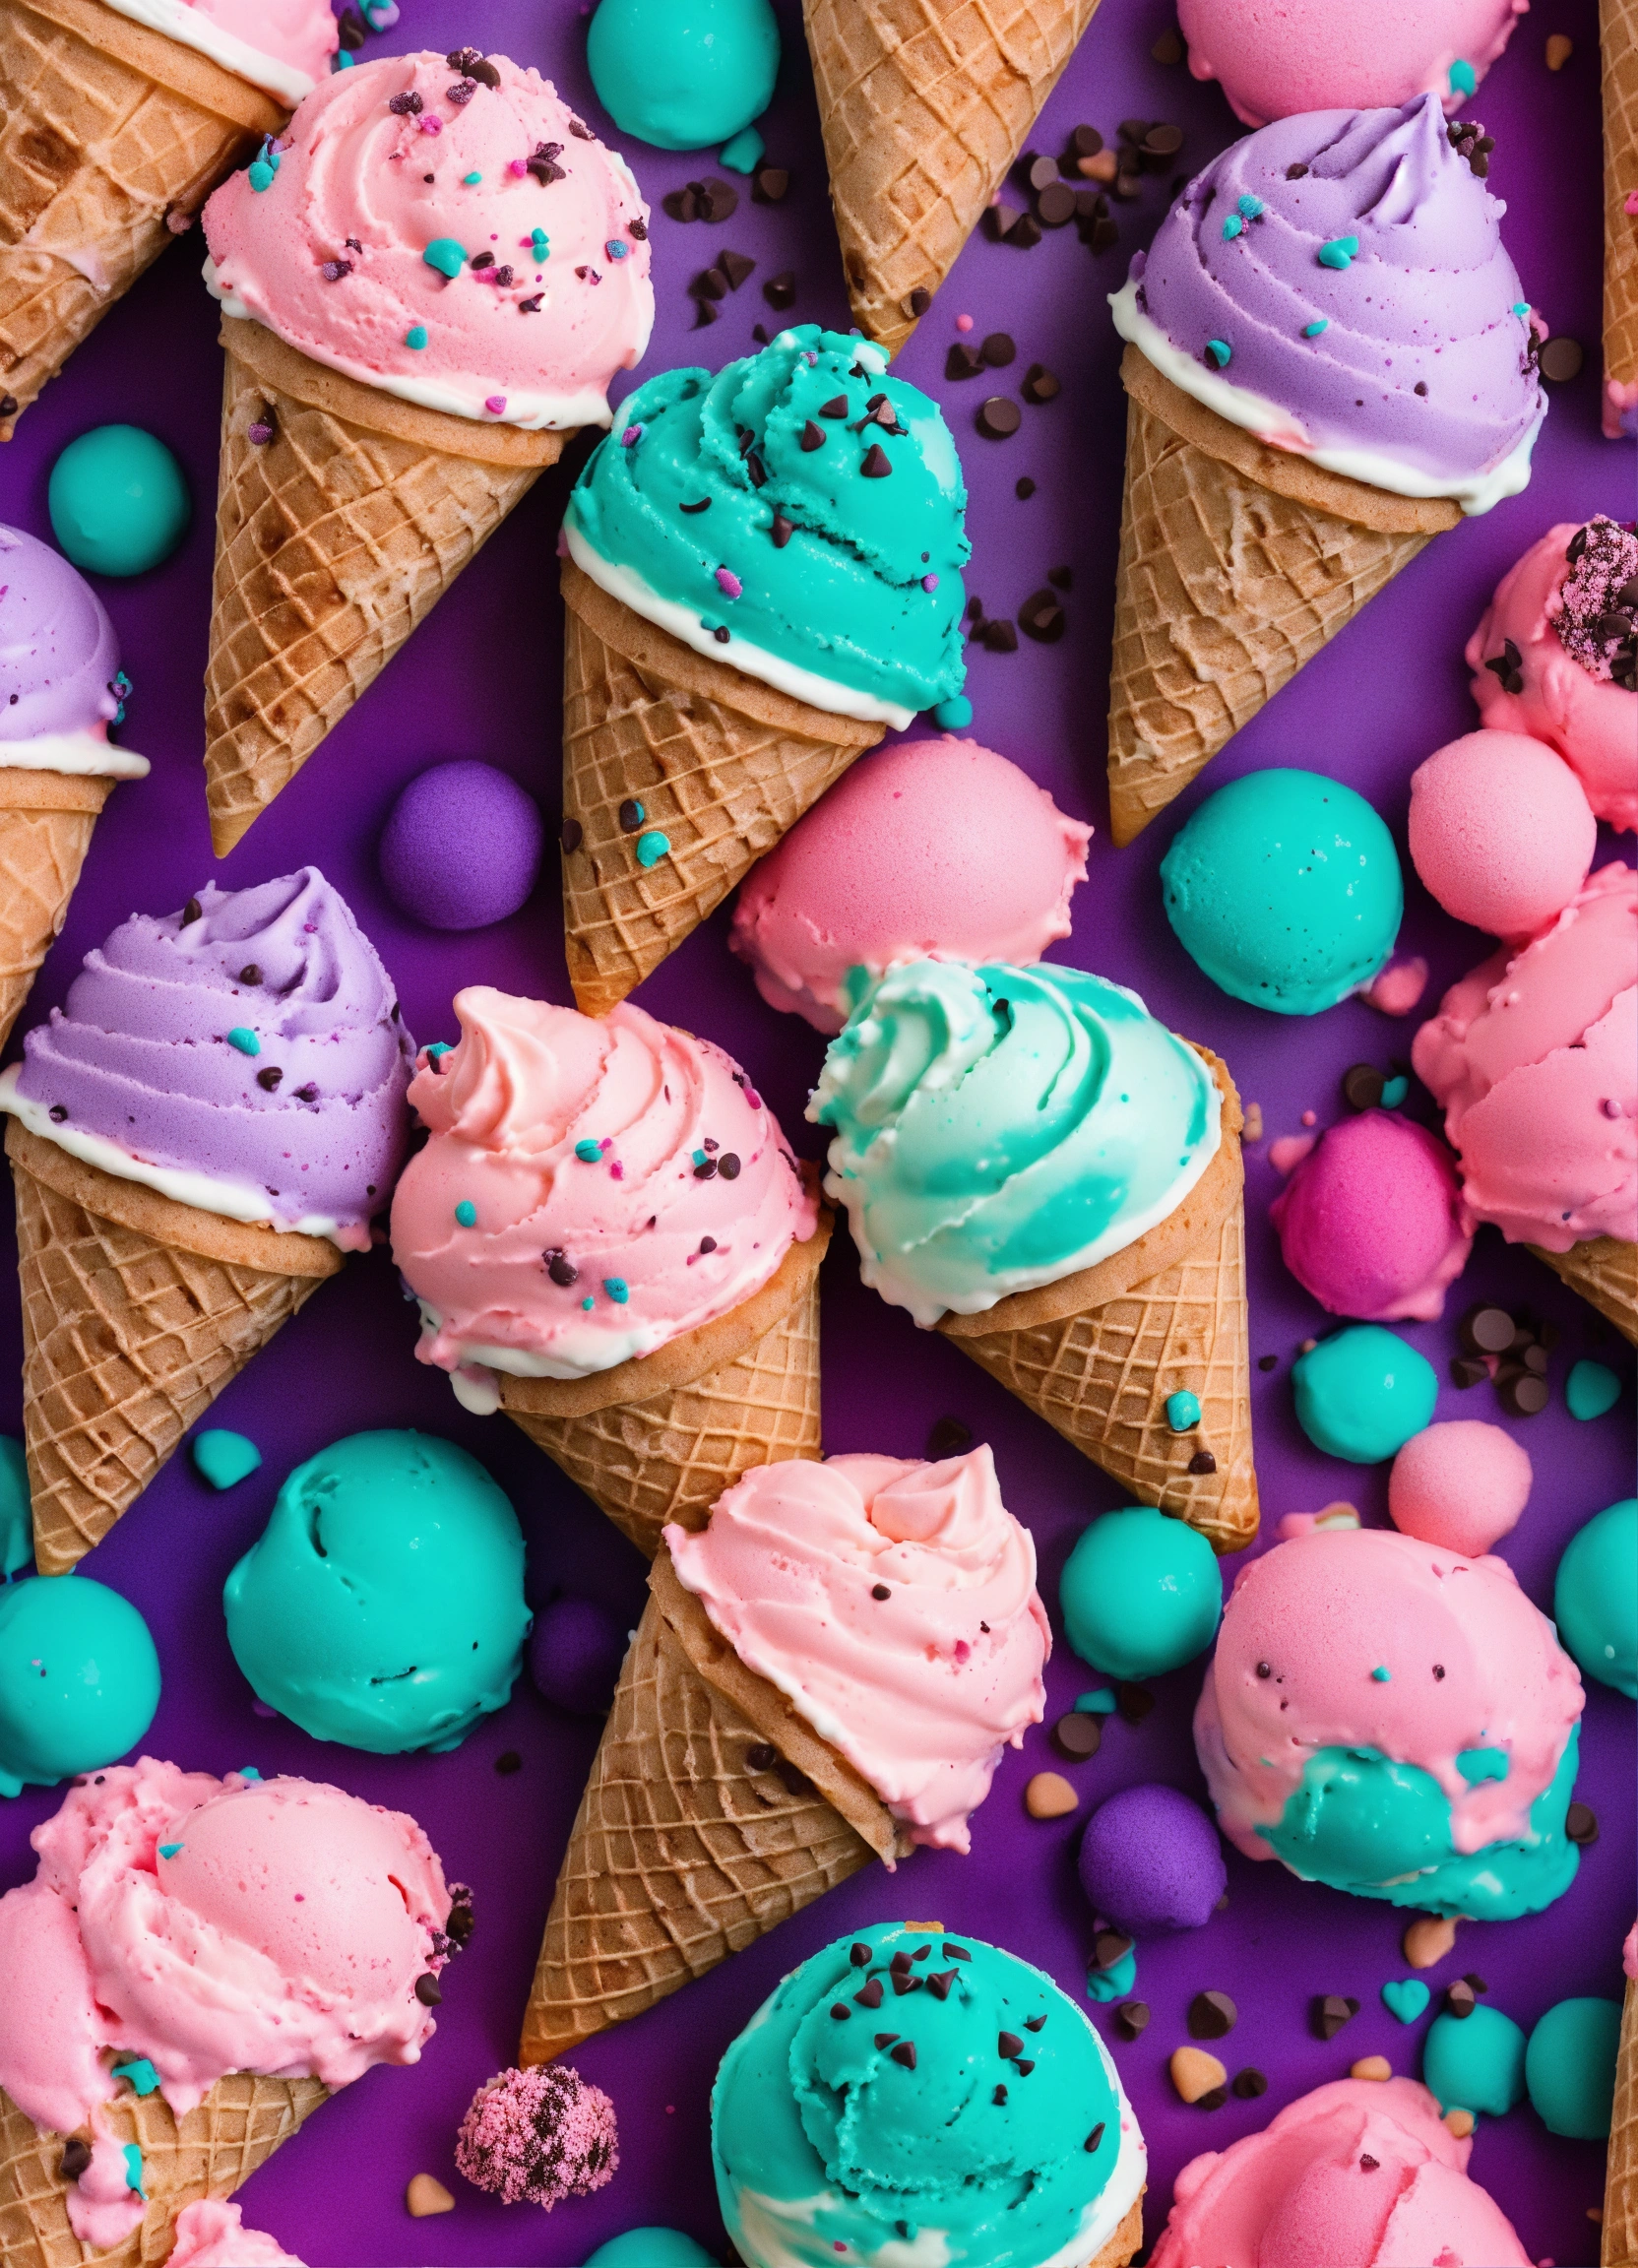 Lexica Realistic Icecream Cone With Pink Icecream Teal Icecream And Purple Icecream With 